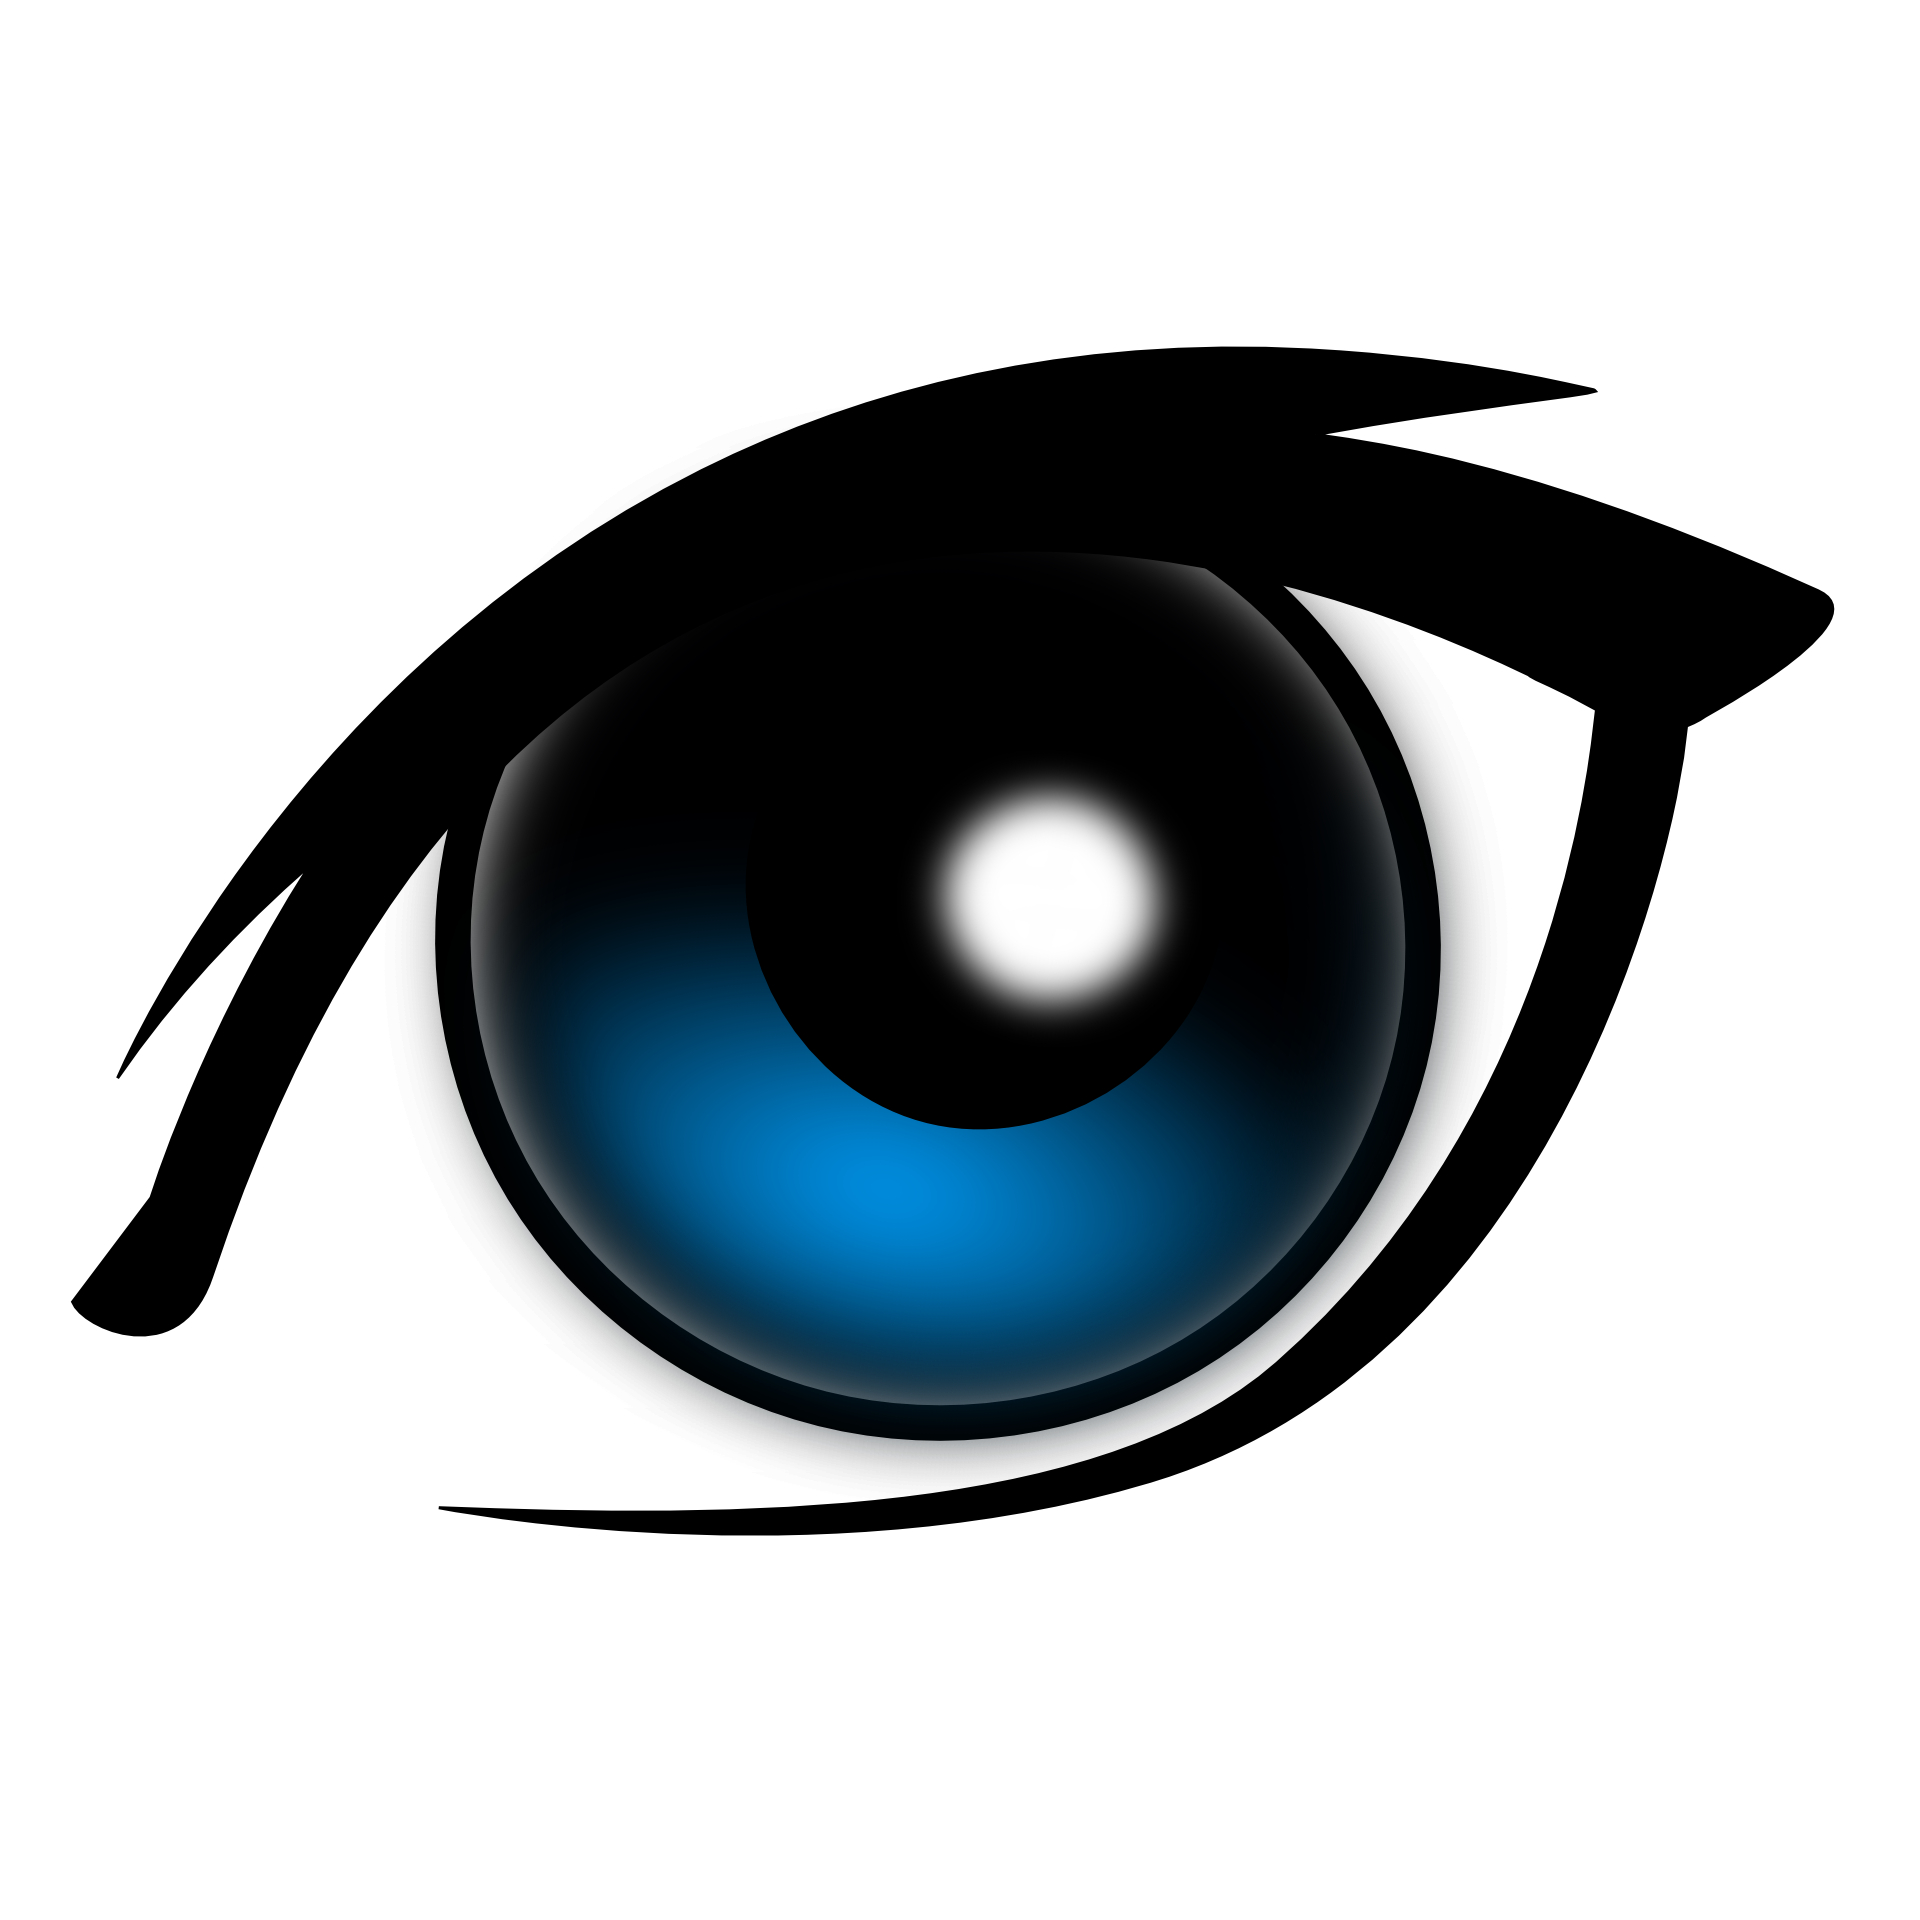 Free Vector Eye, Download Free Vector Eye png images, Free ClipArts on